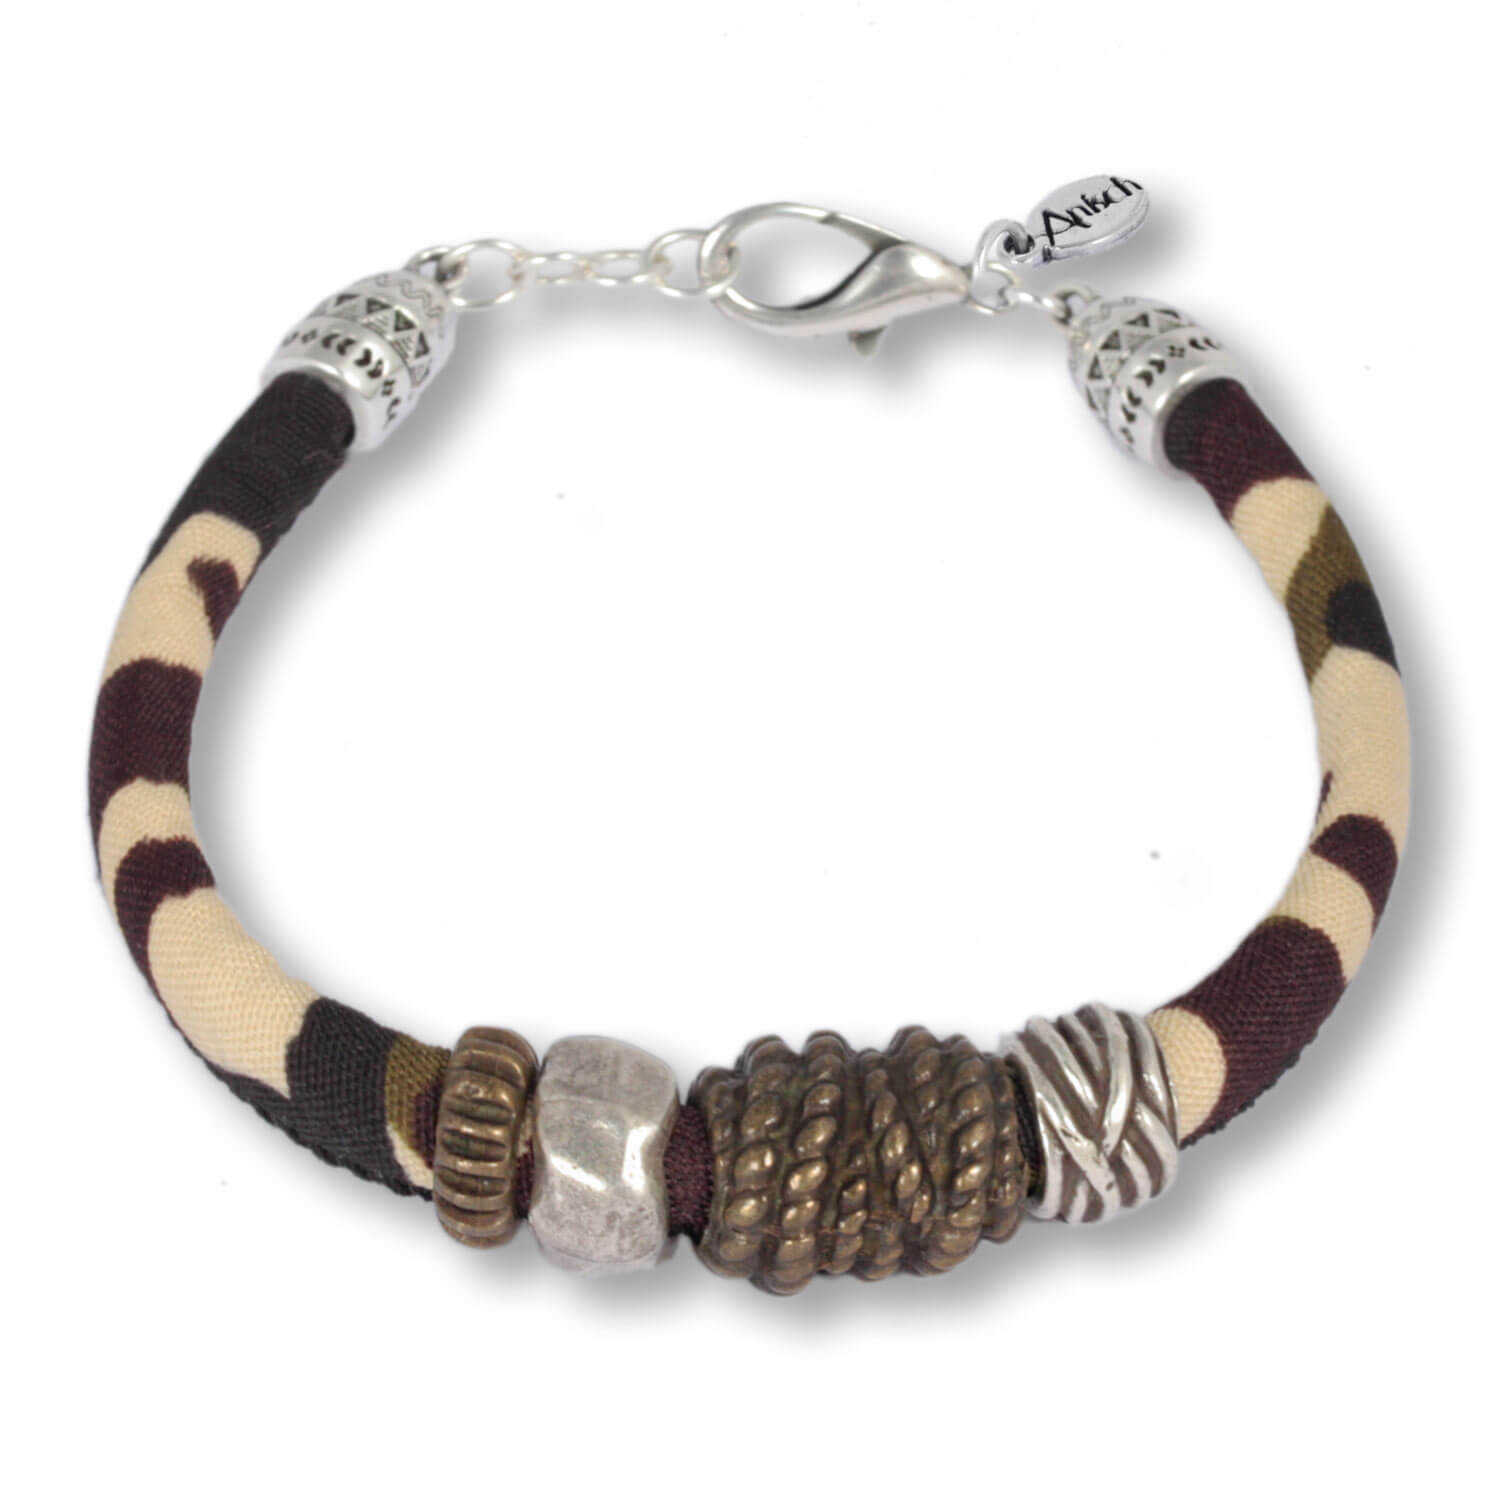 Camouflage chief - Ethno bracelet with traditional patterns